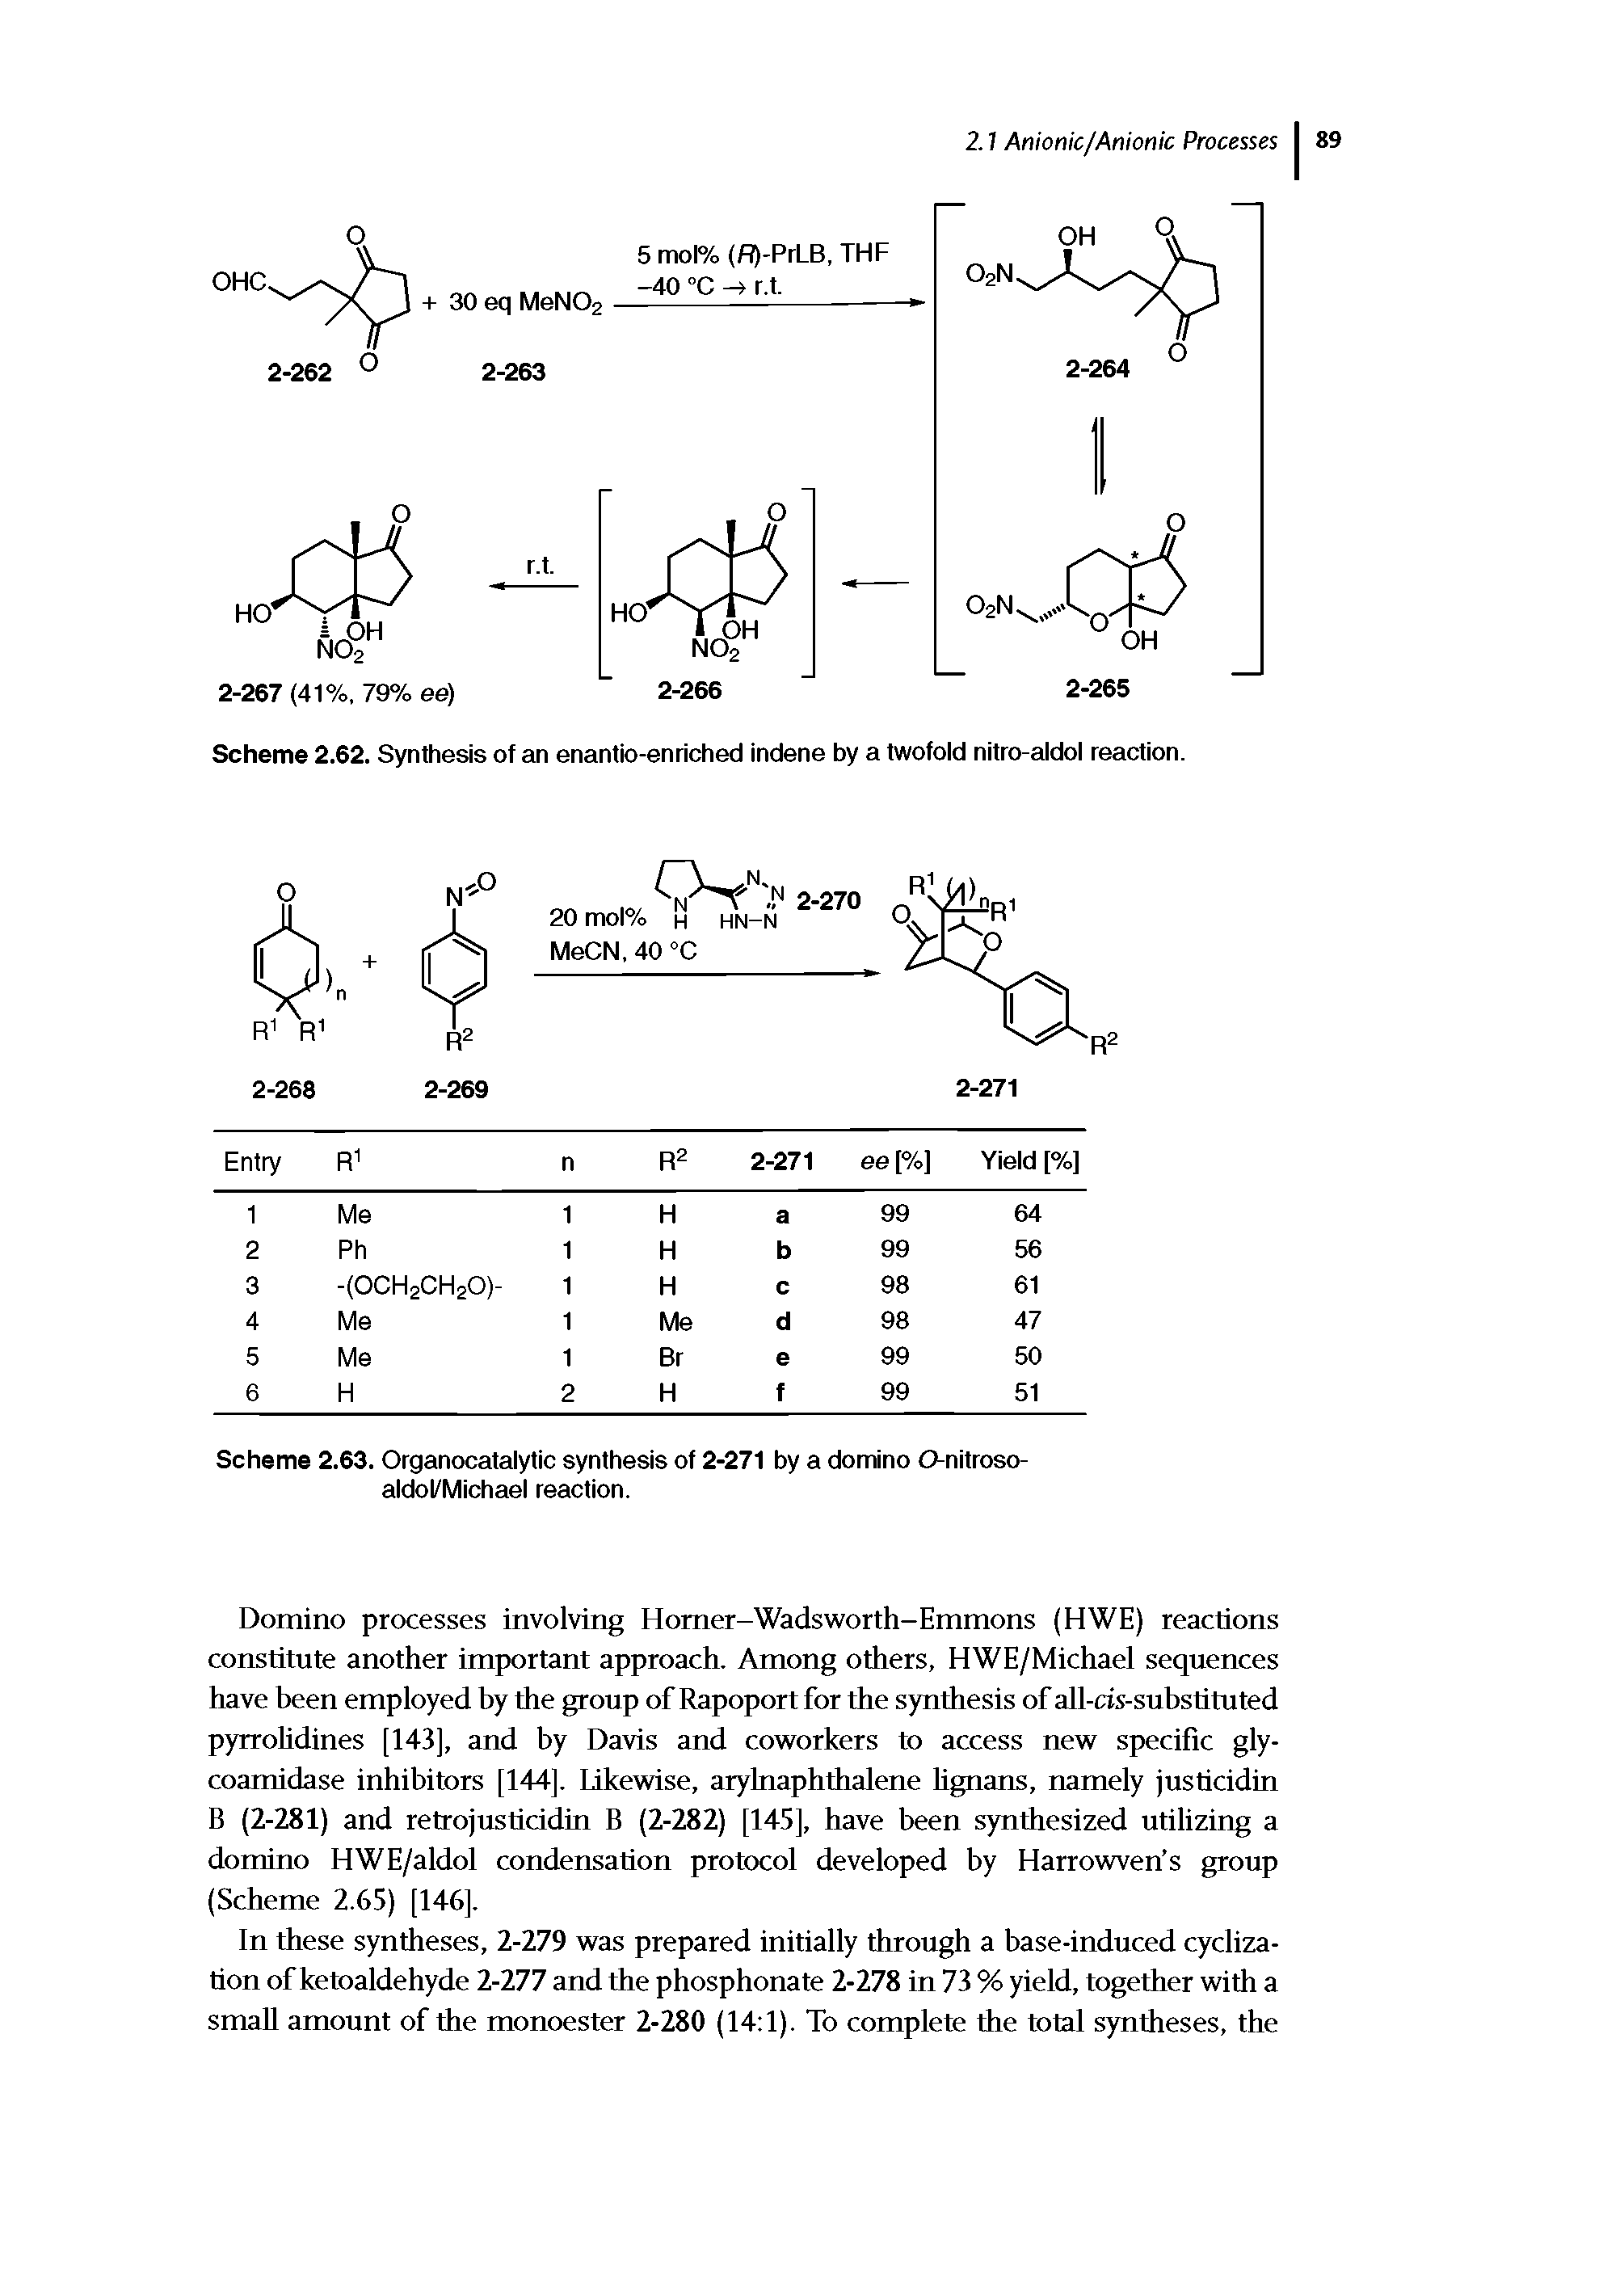 Scheme 2.63. Organocatalytic synthesis of 2-271 by a domino O-nitroso-aldol/Michael reaction.